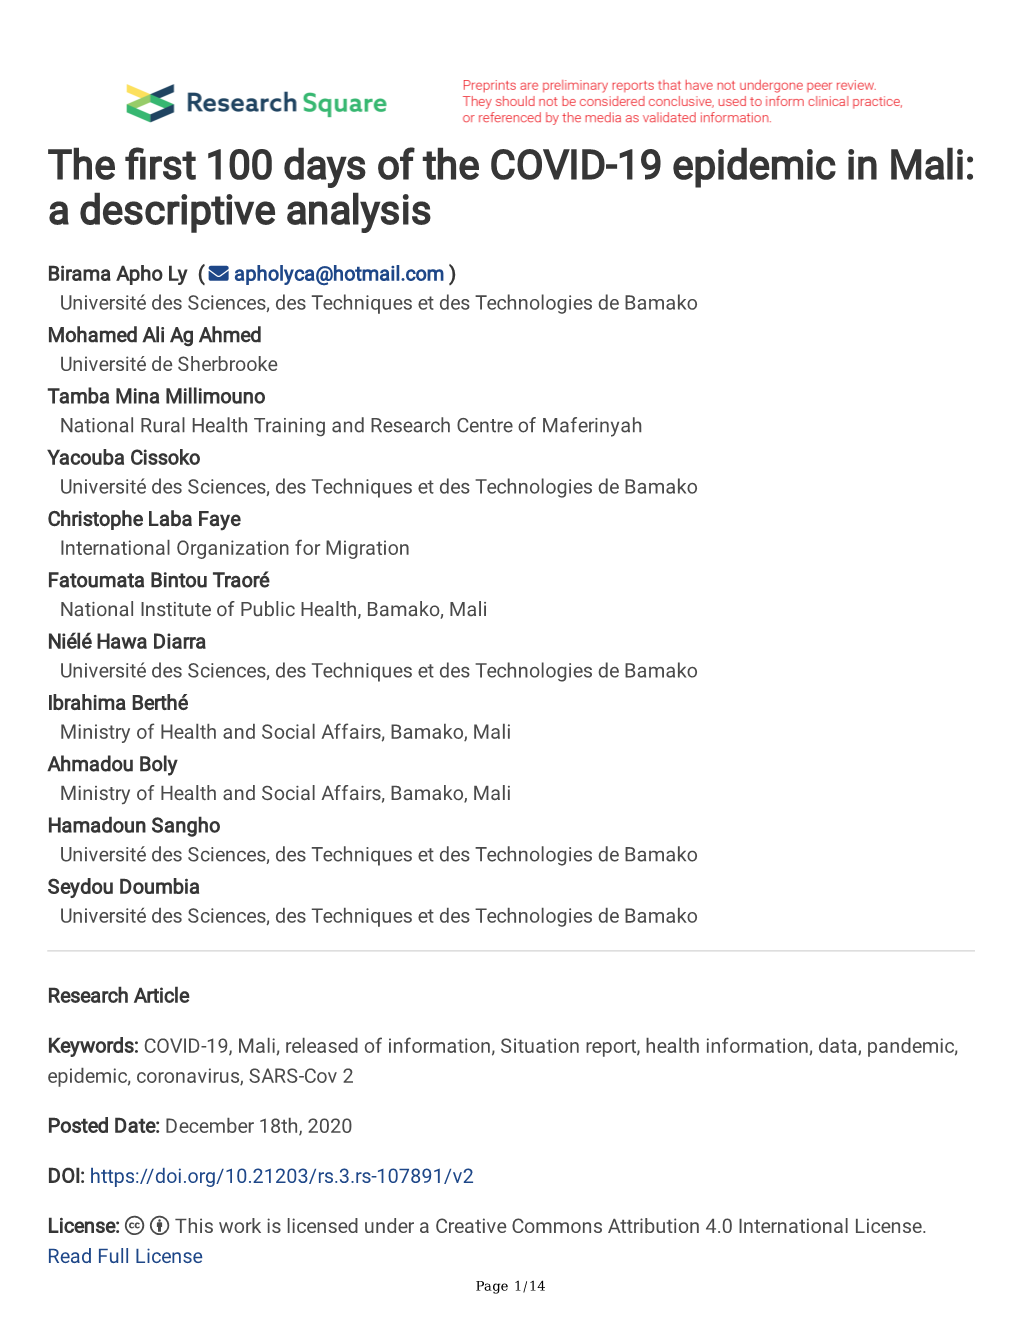 The Rst 100 Days of the COVID-19 Epidemic in Mali